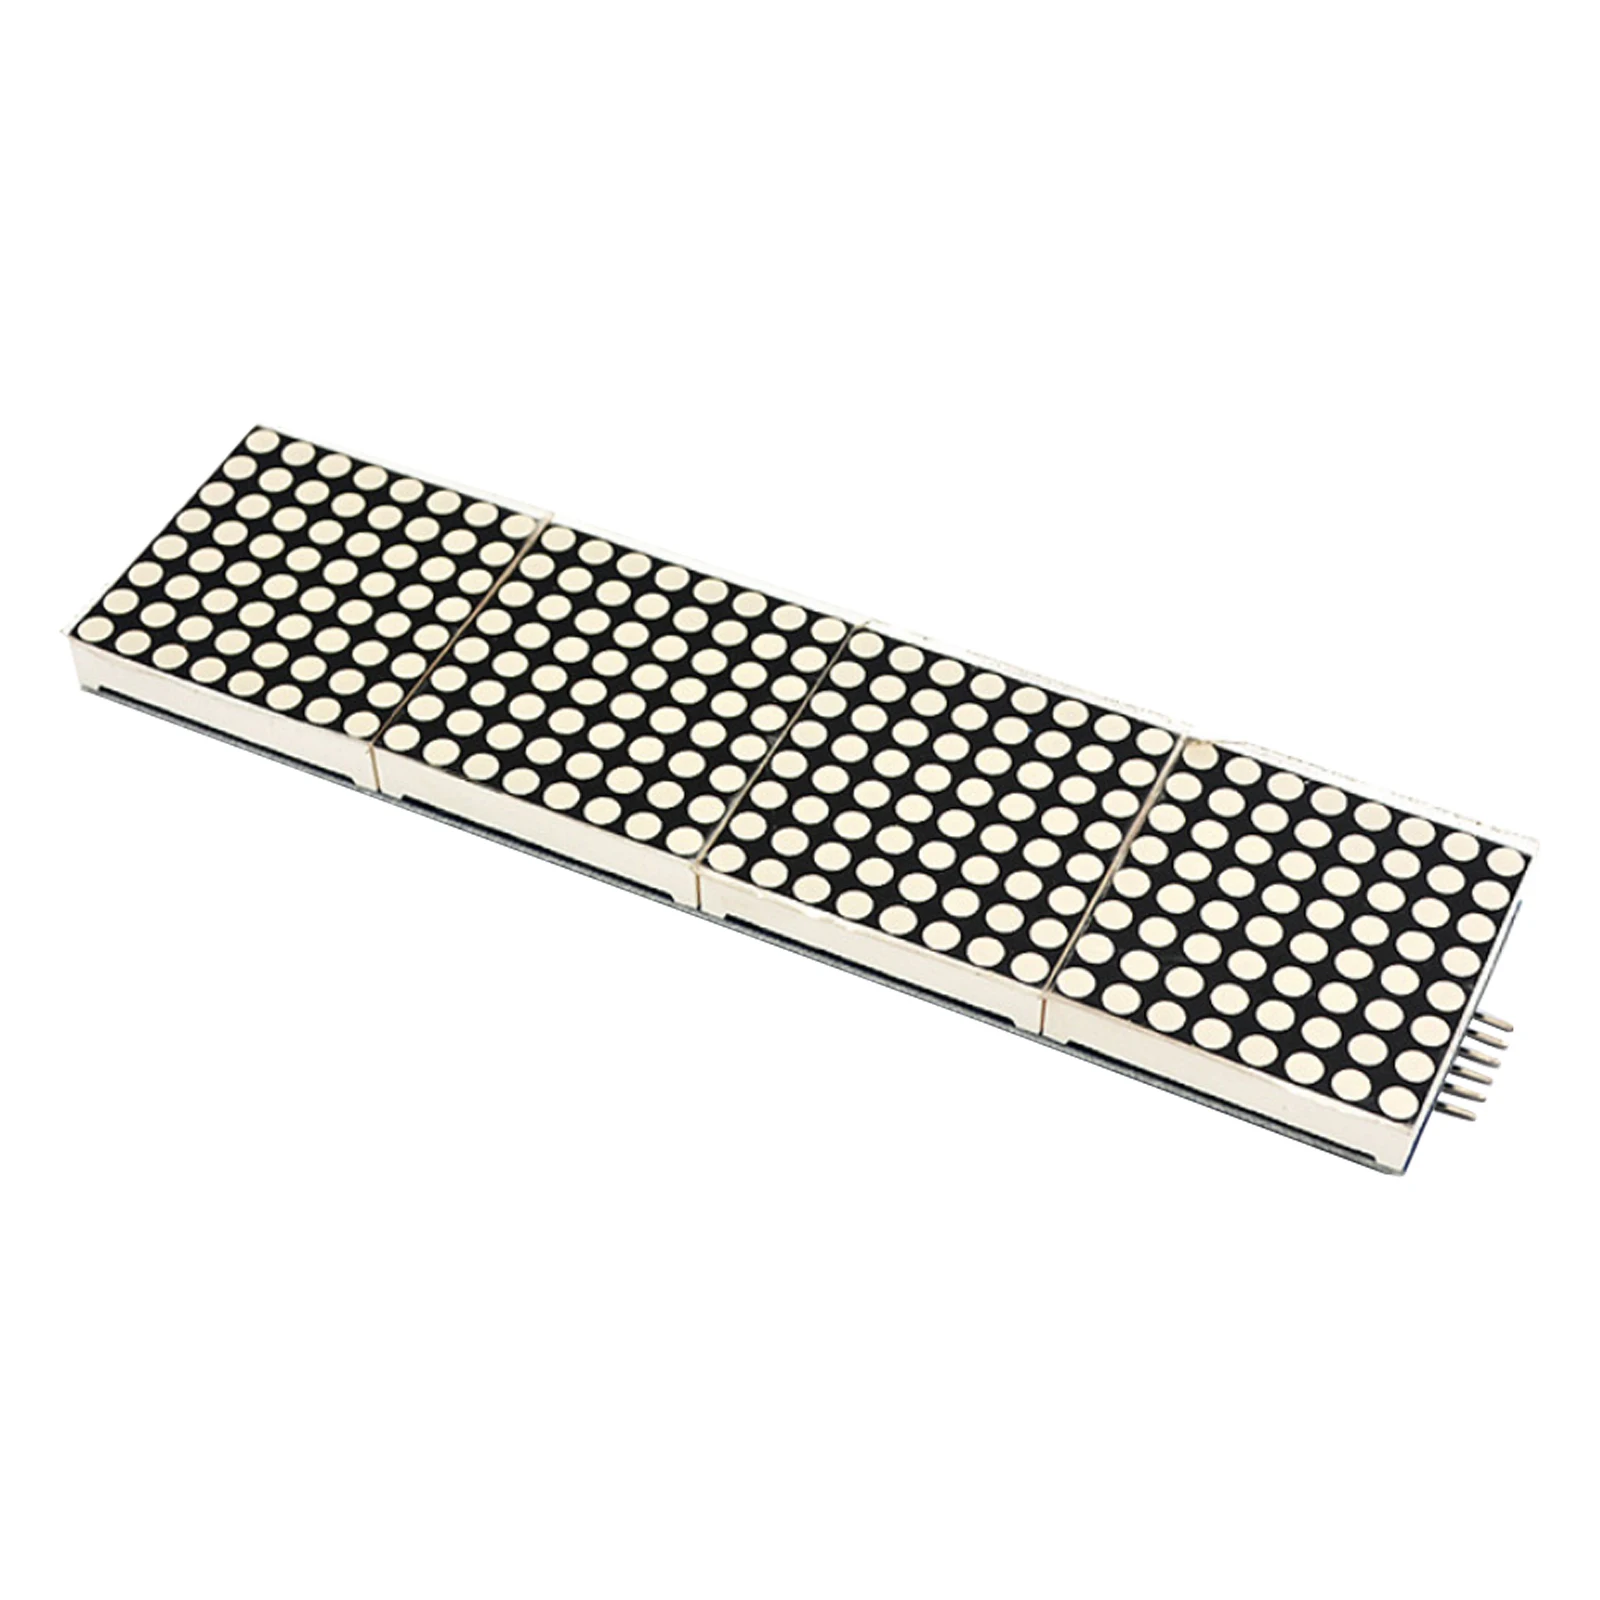 HT1632C LED Dot Matrices 8x32 - Triple Color  common Anode Display